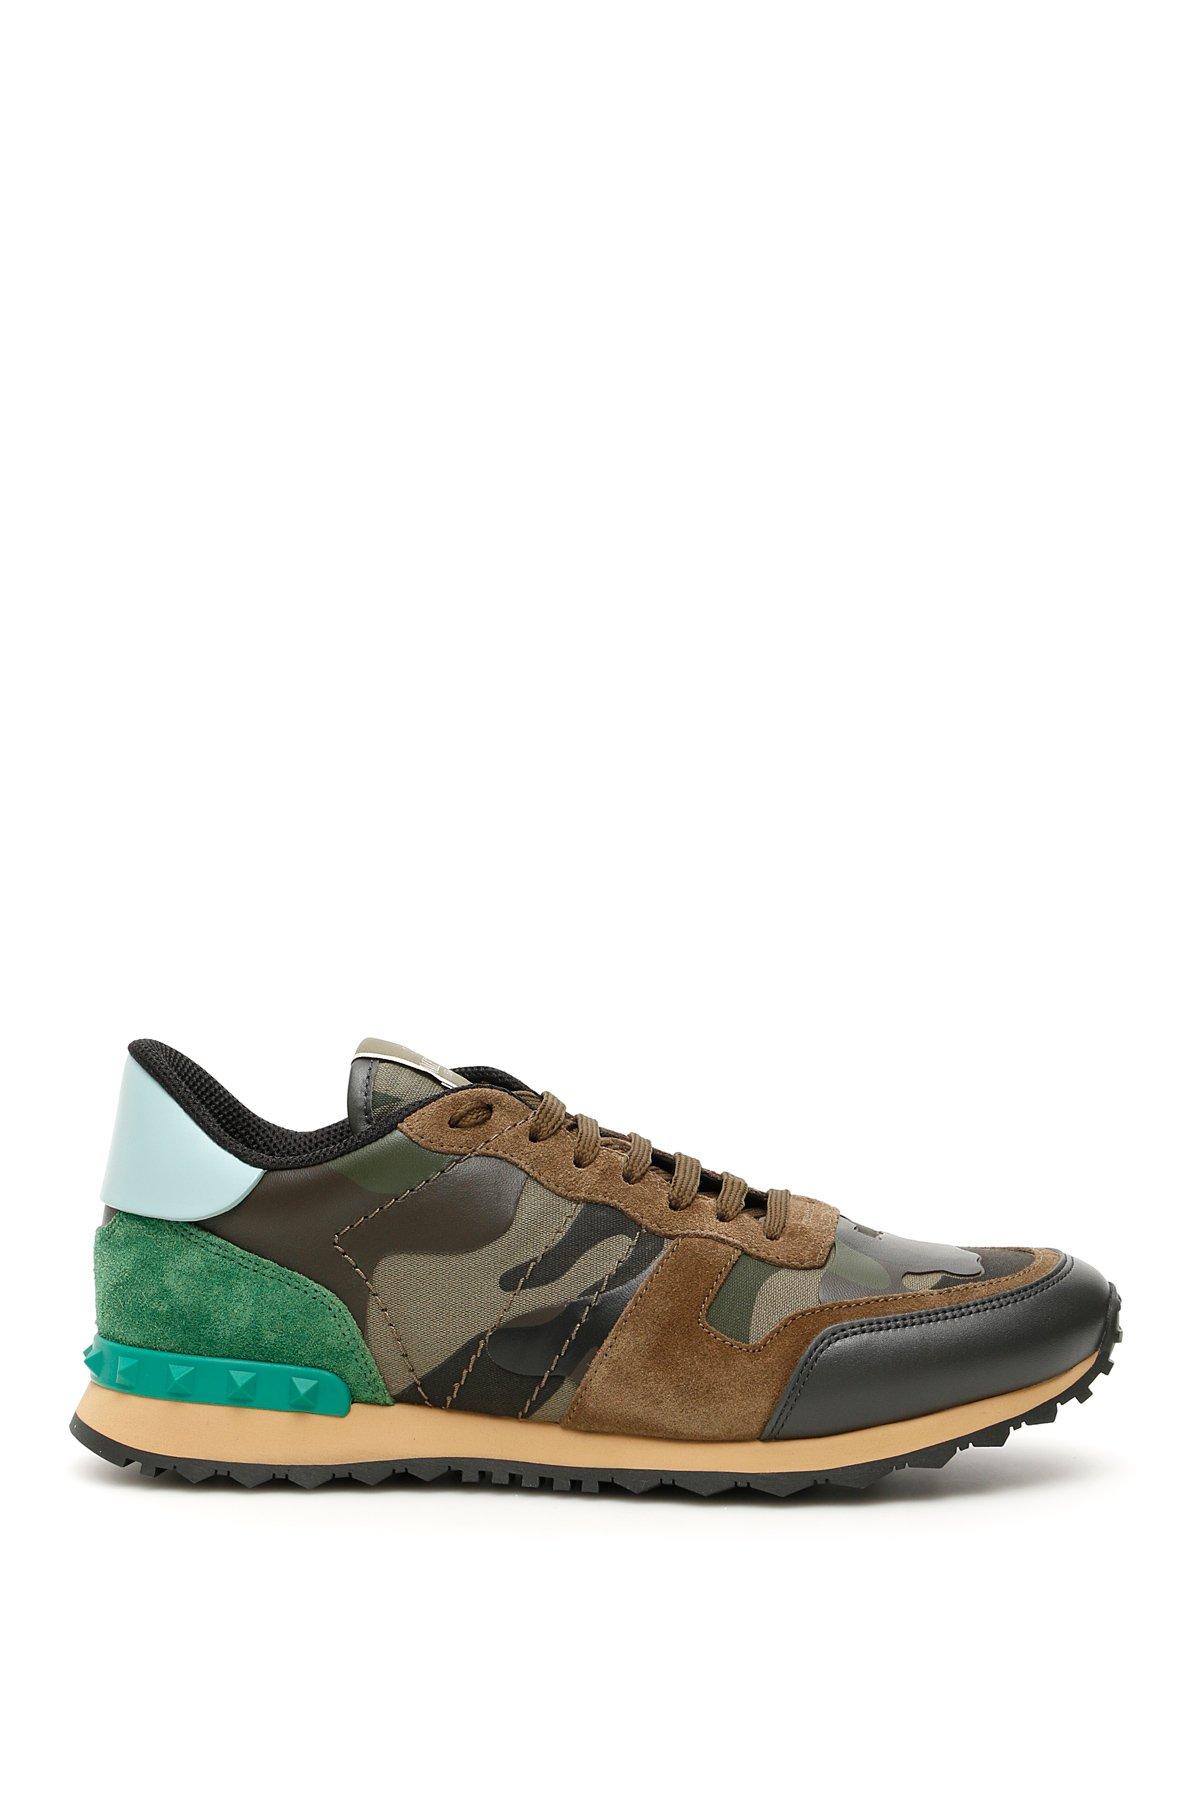 Valentino Garavani Leather Camouflage Rockrunner Sneakers in Green for ...